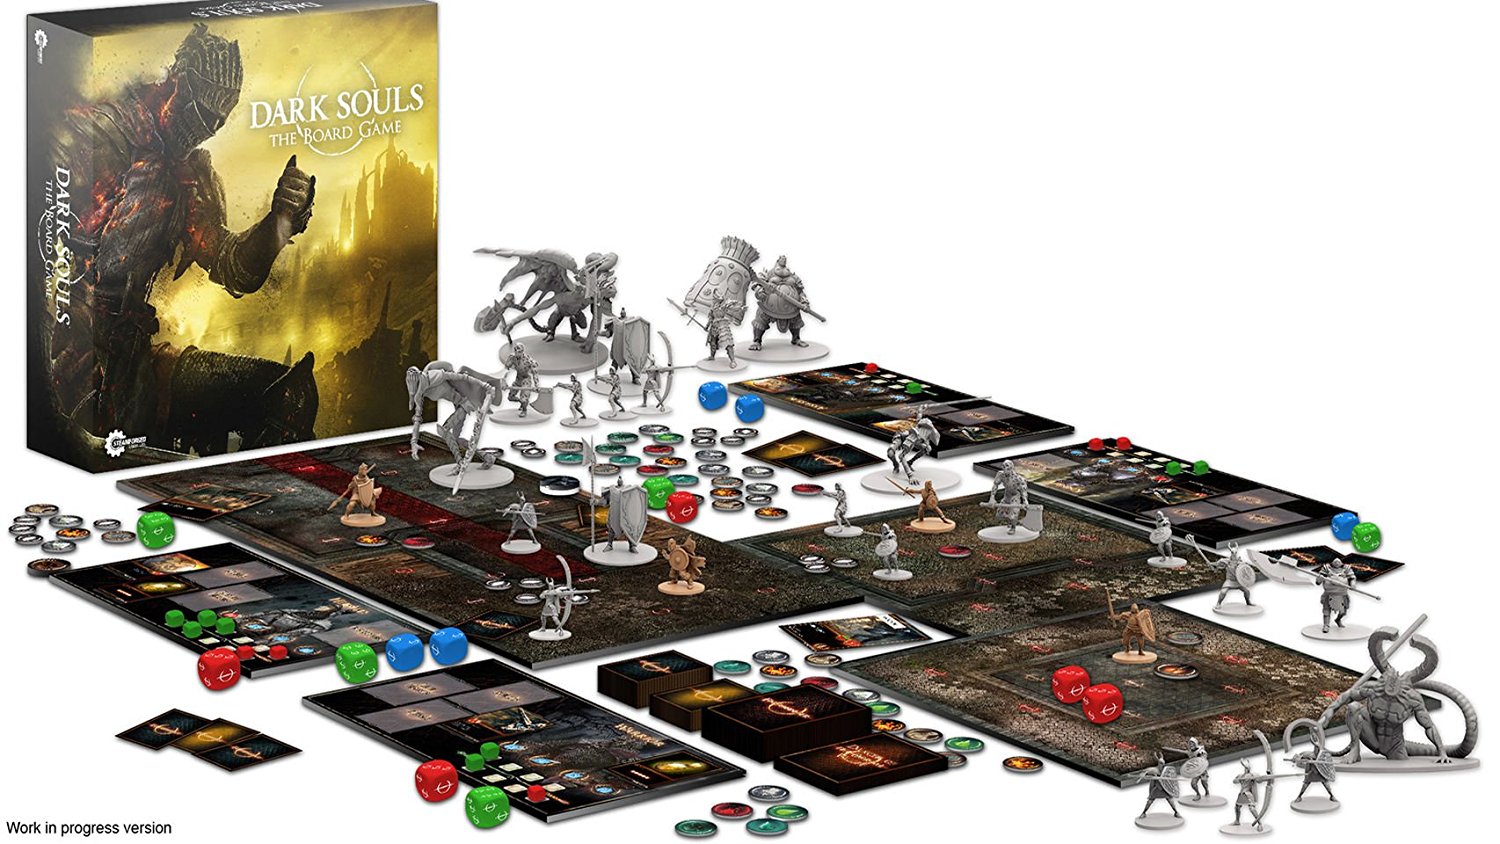 Dark Souls — The Board Game engages with jolly cooperation